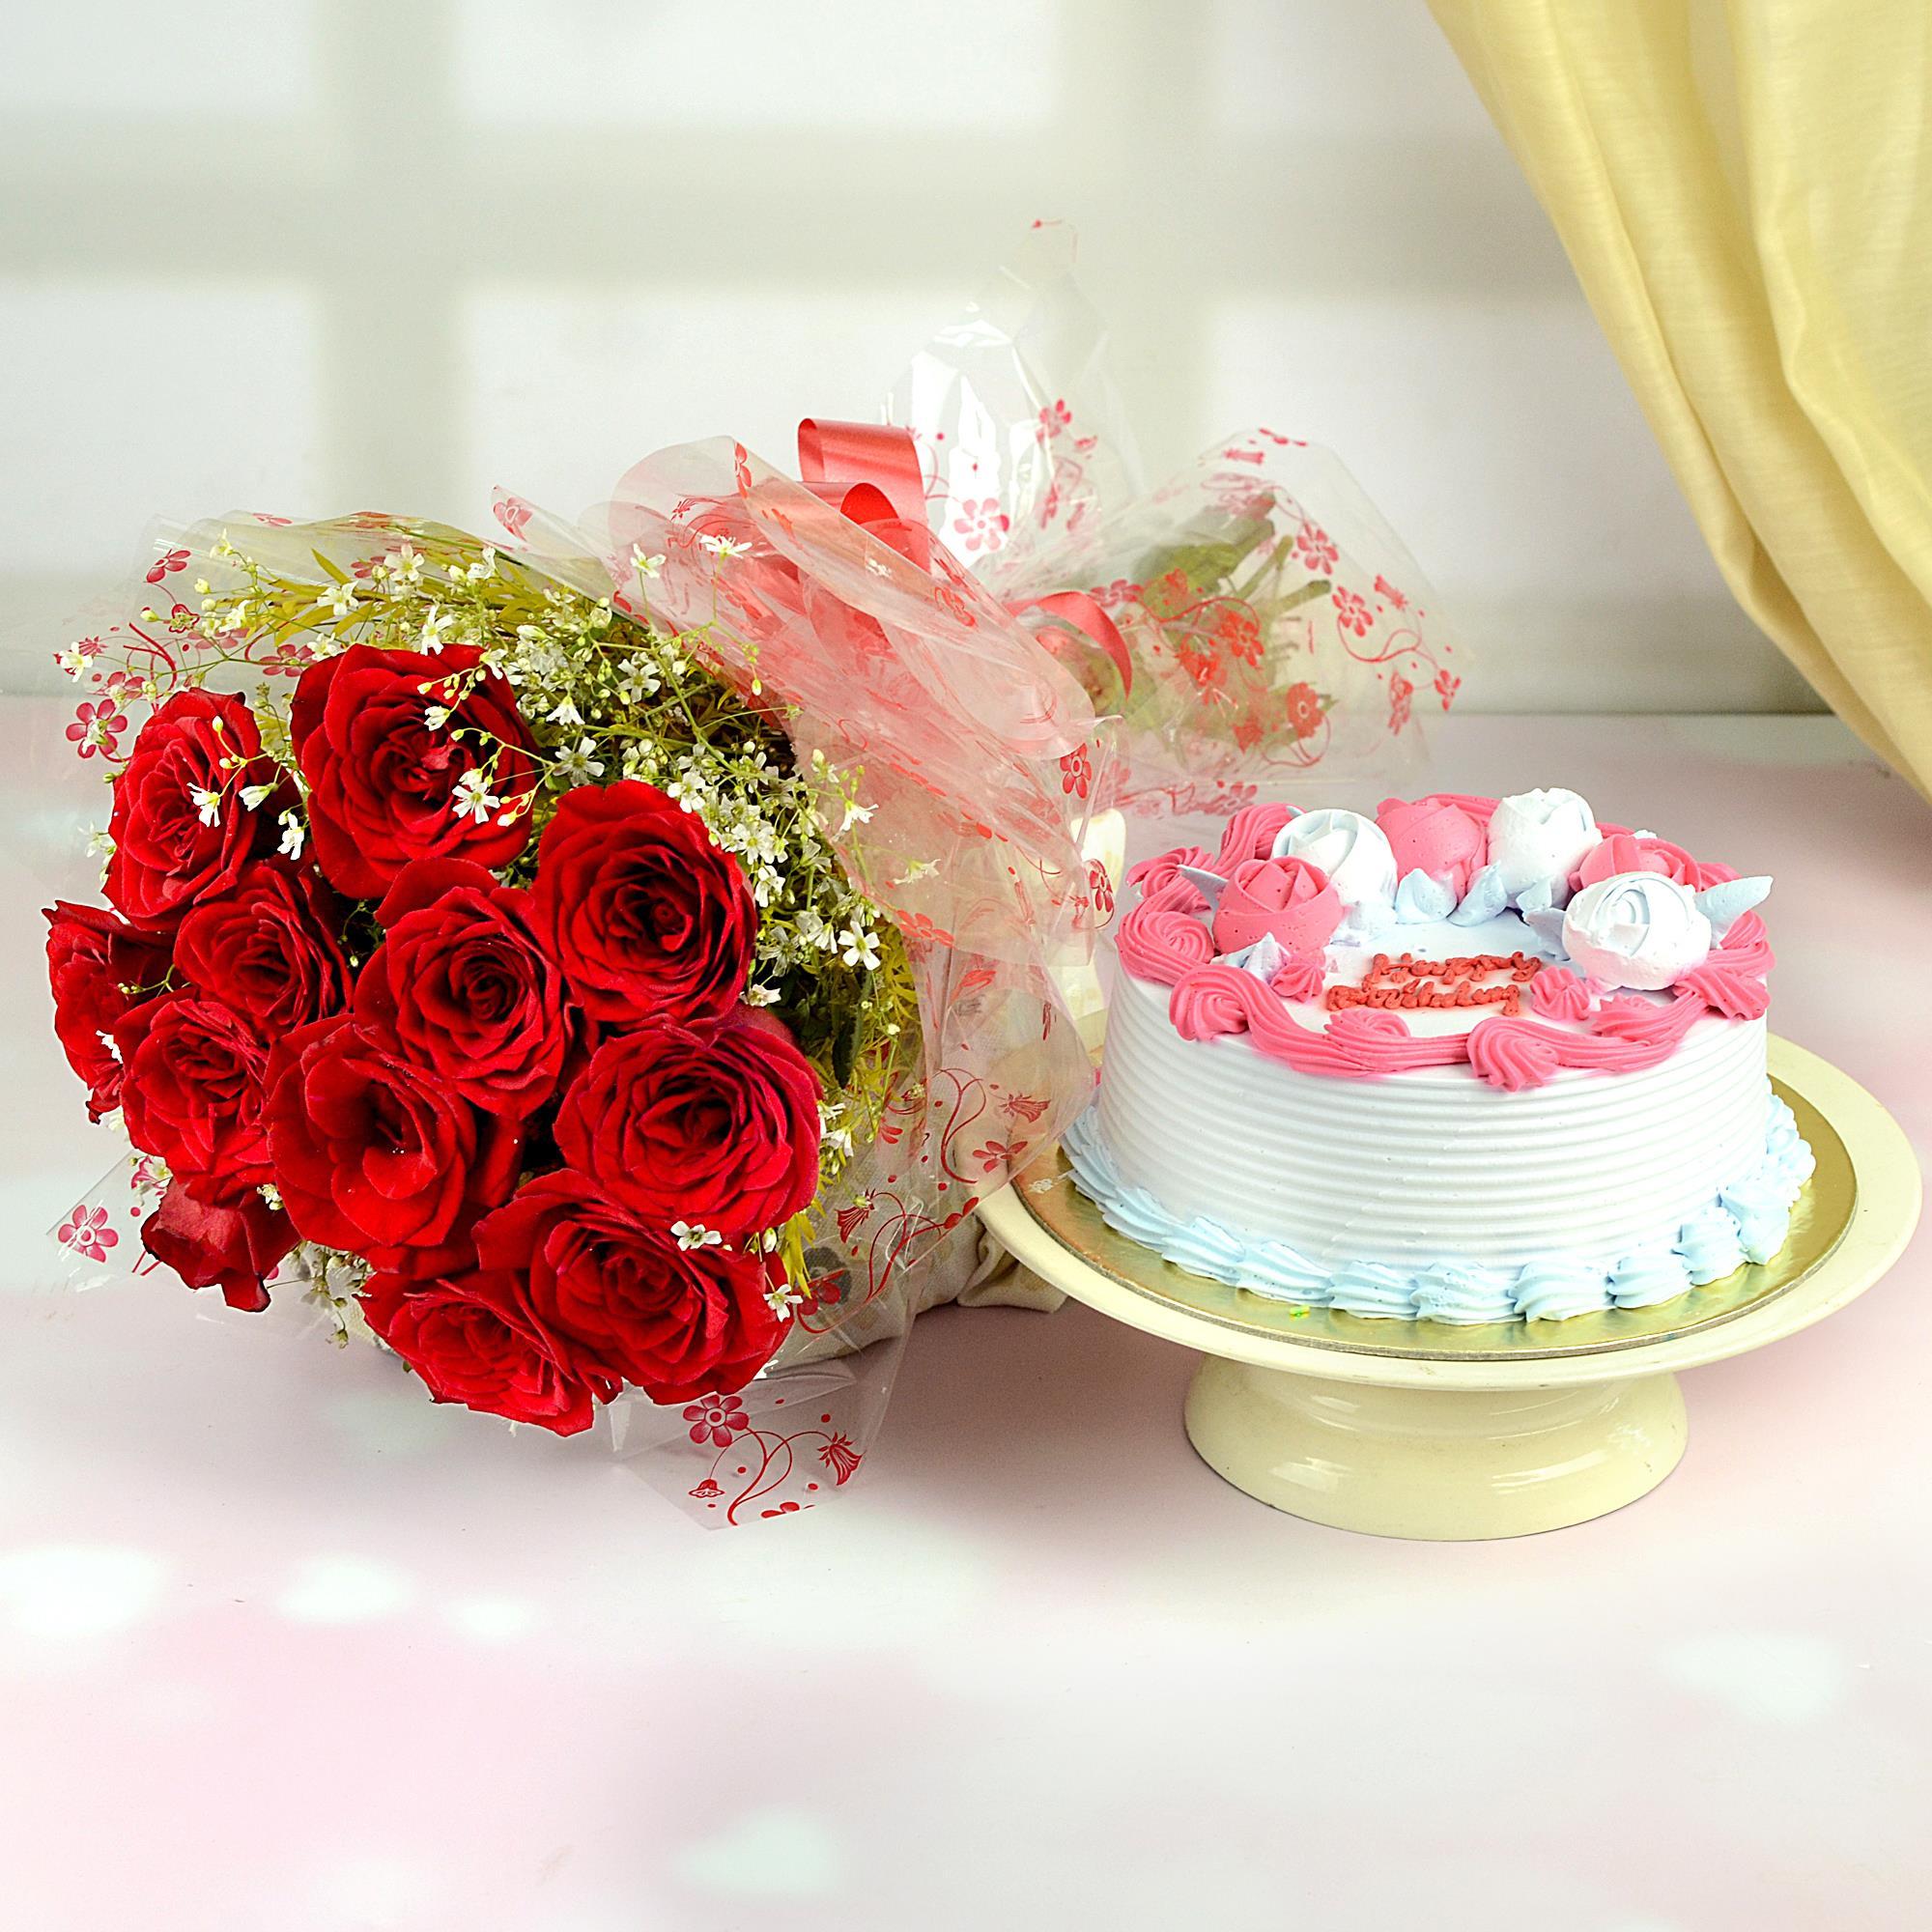 Rose Bouquet - Pastries by Randolph